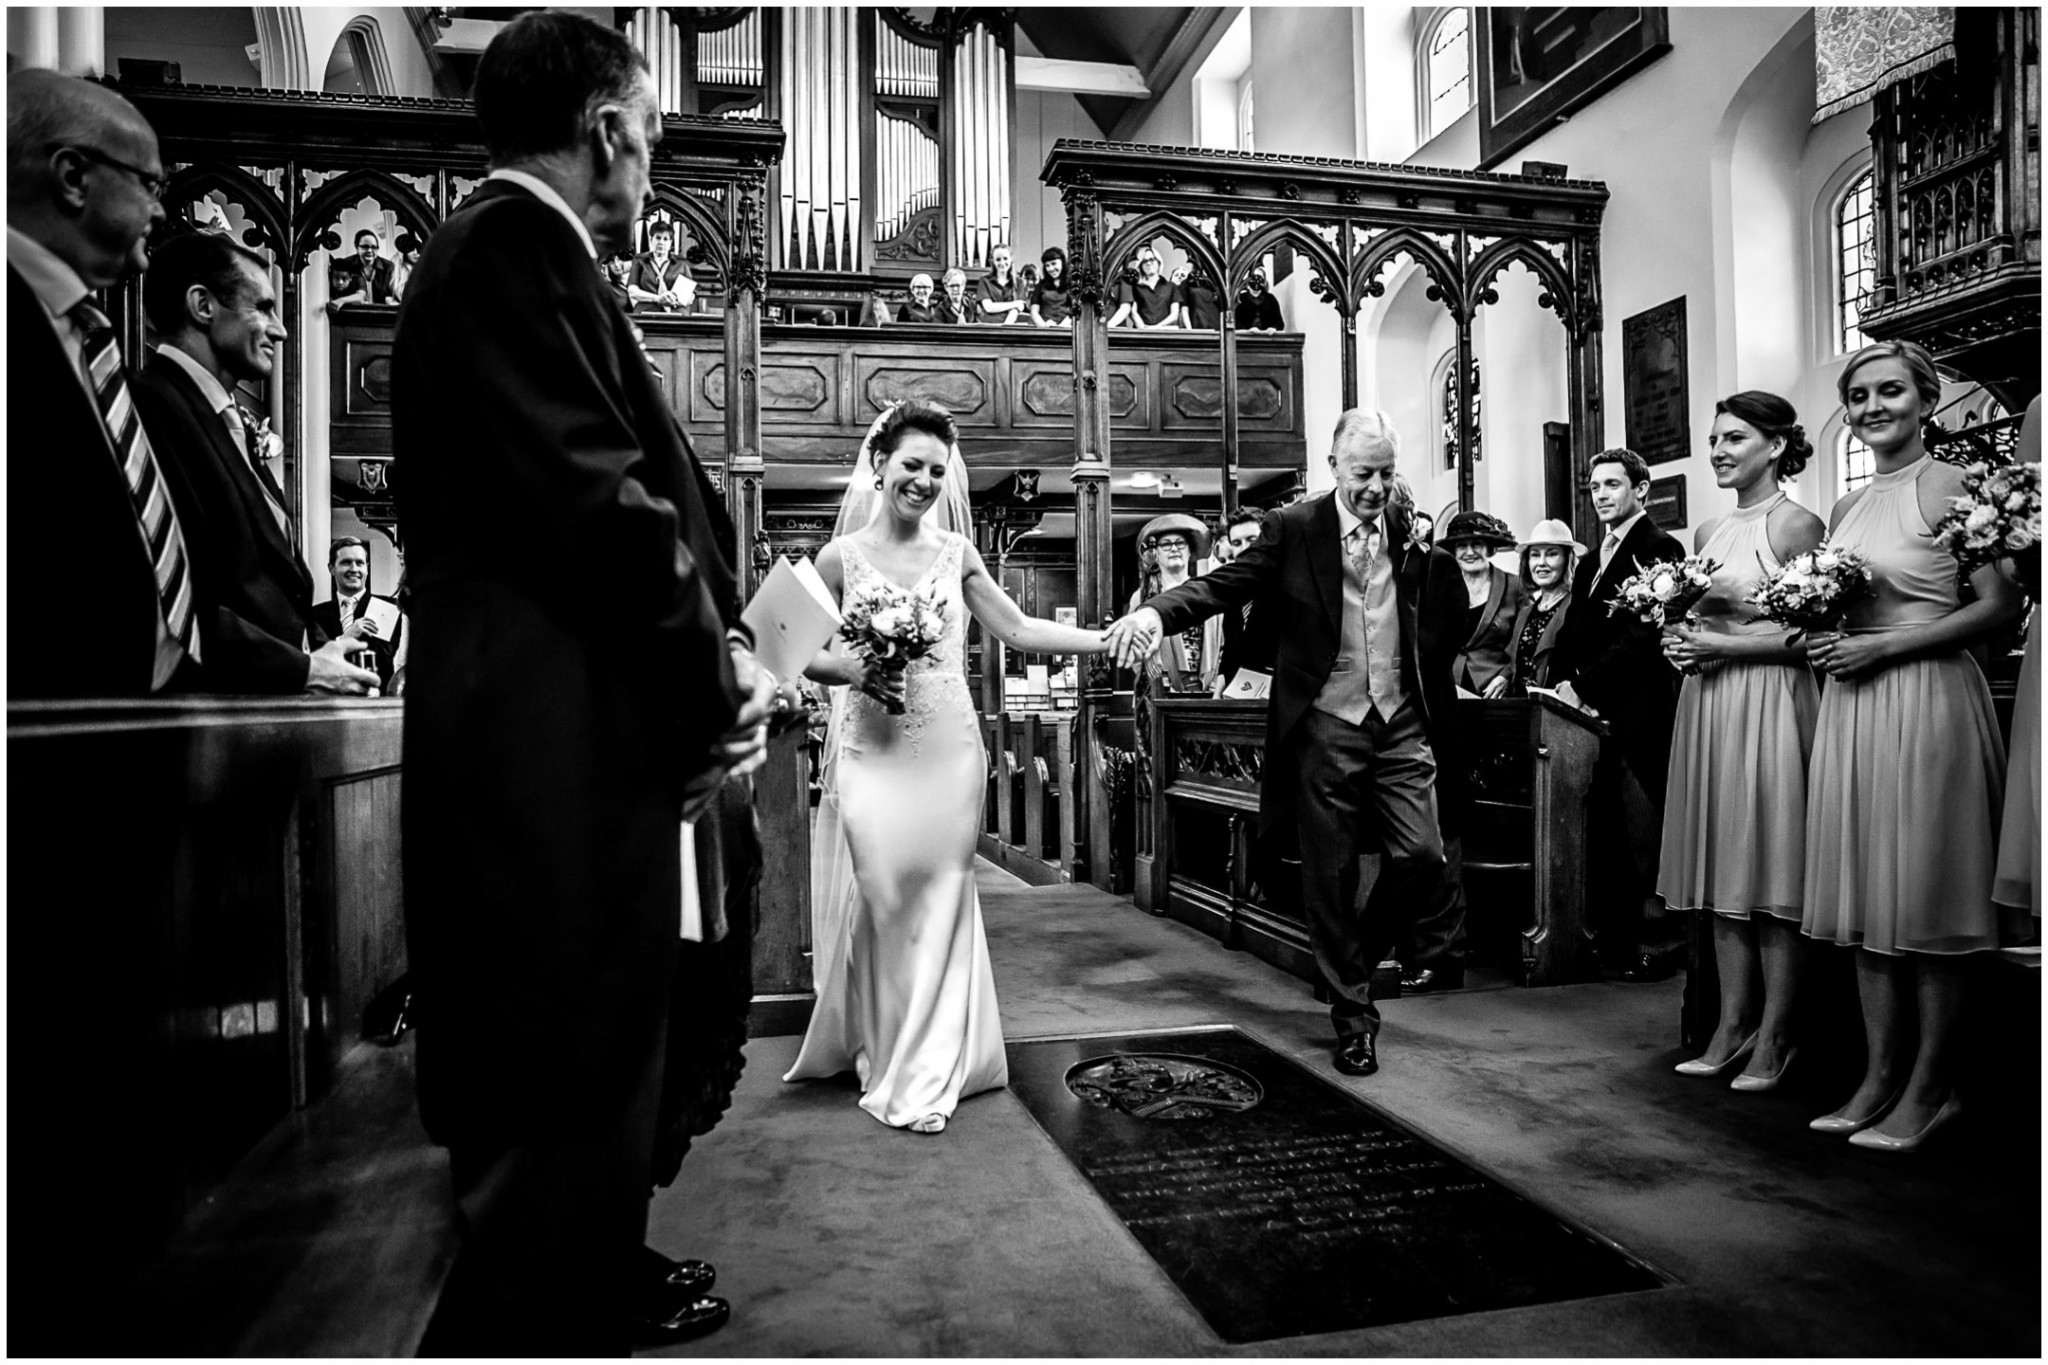 dulwich-picture-gallery-wedding-photography-022